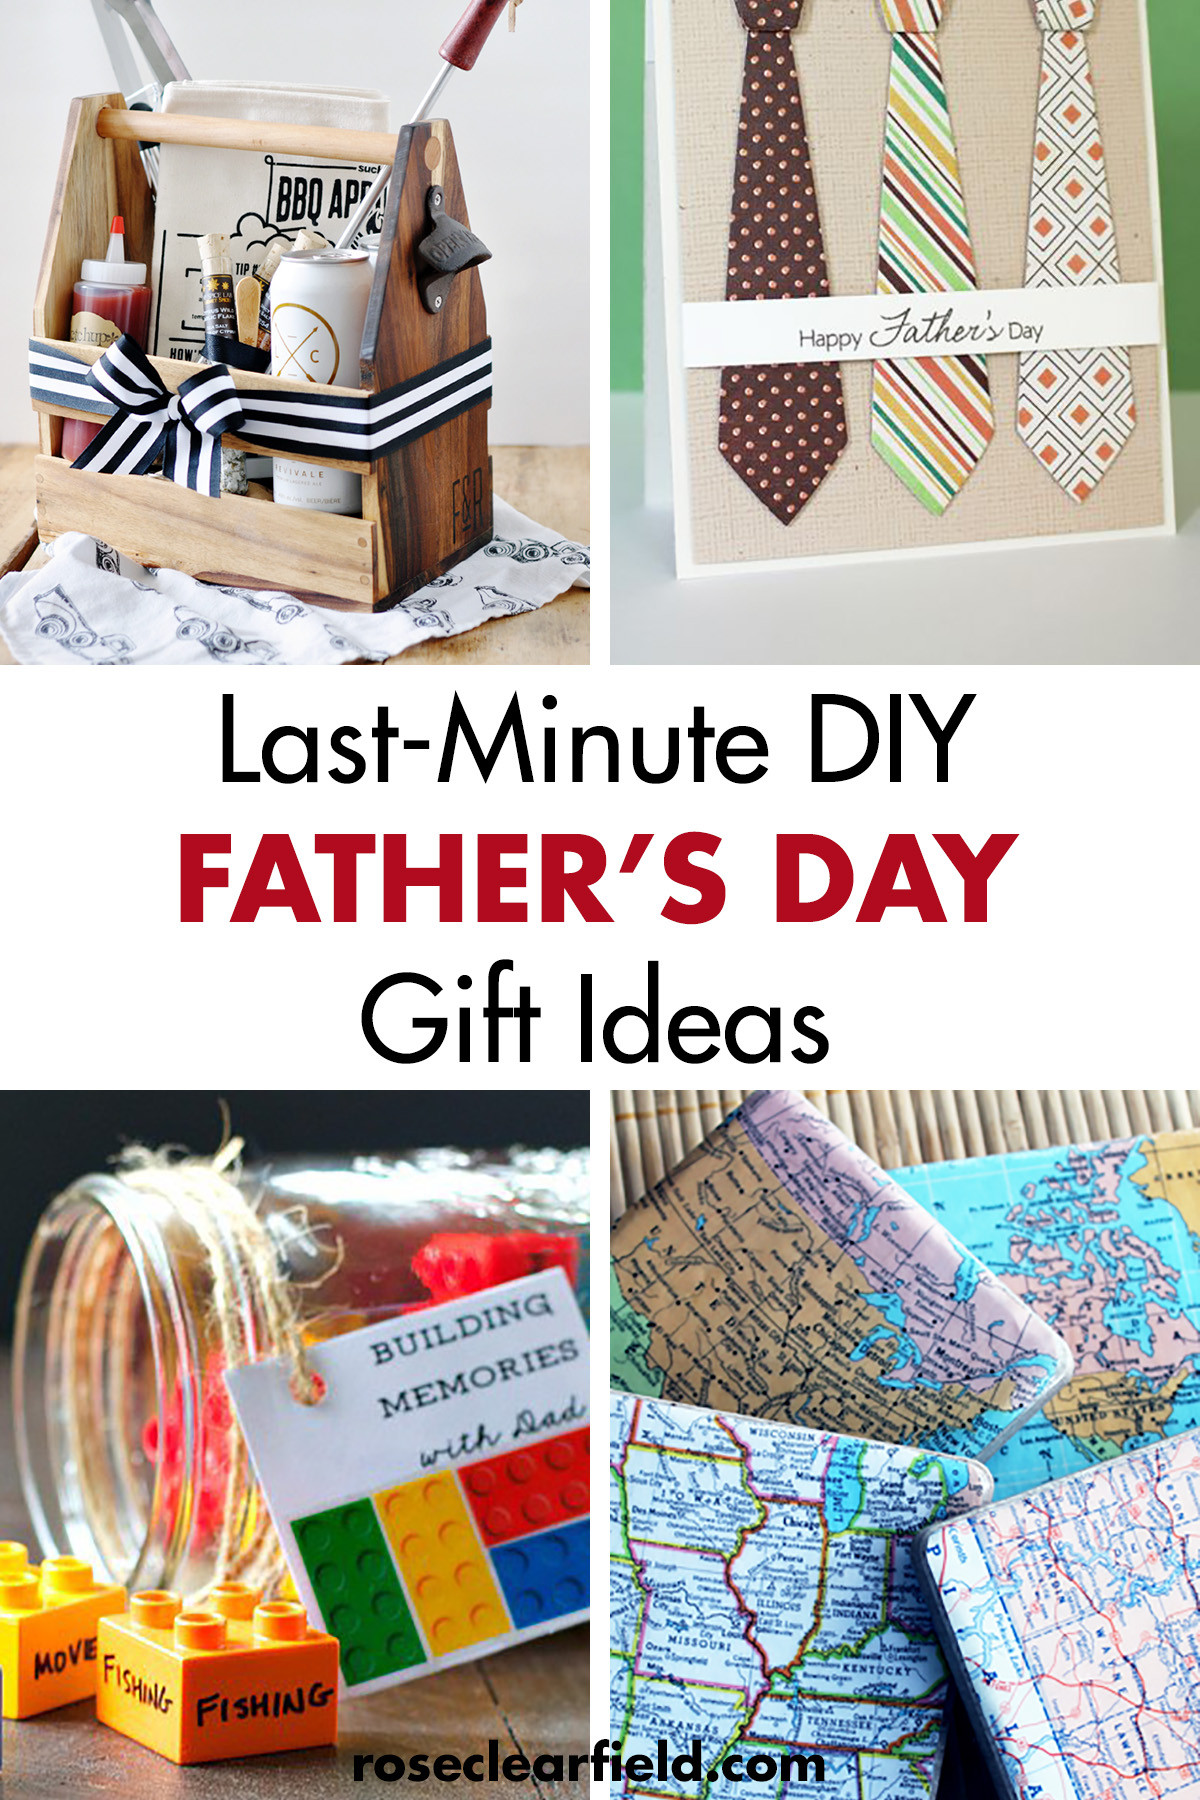 Father'S Day DIY Gifts
 Last Minute DIY Father s Day Gift Ideas • Rose Clearfield